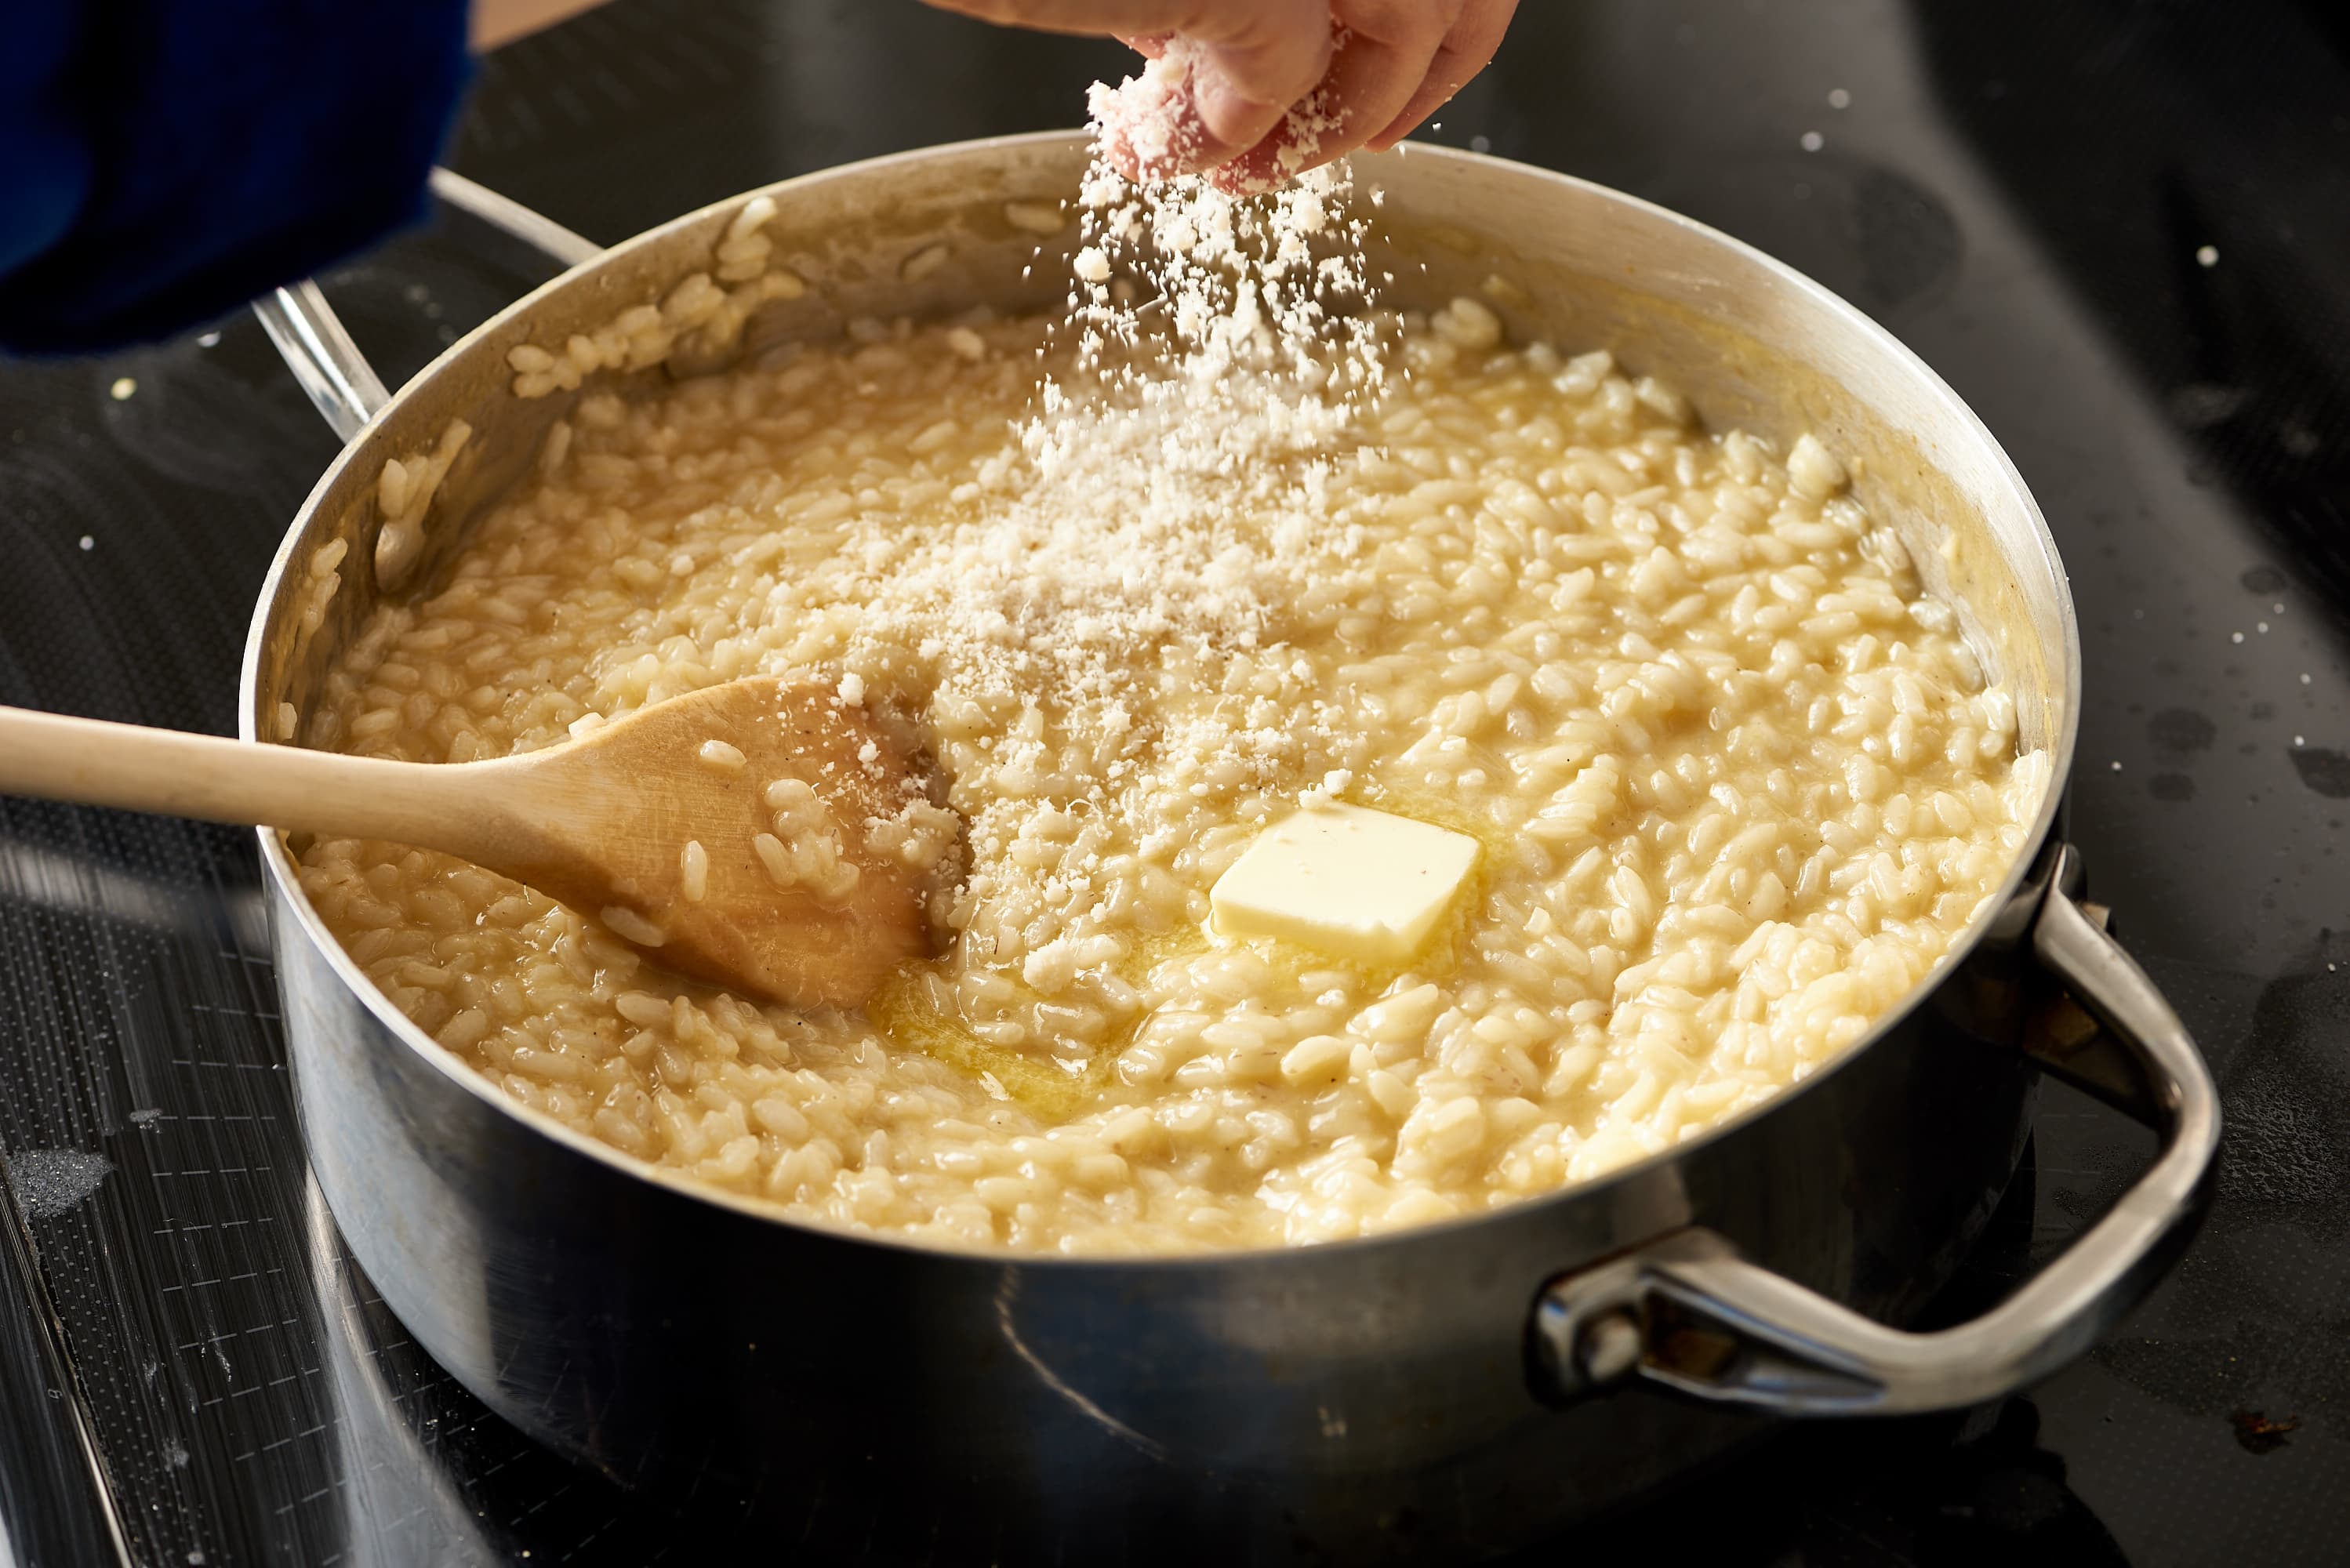 How To Make Risotto at Home